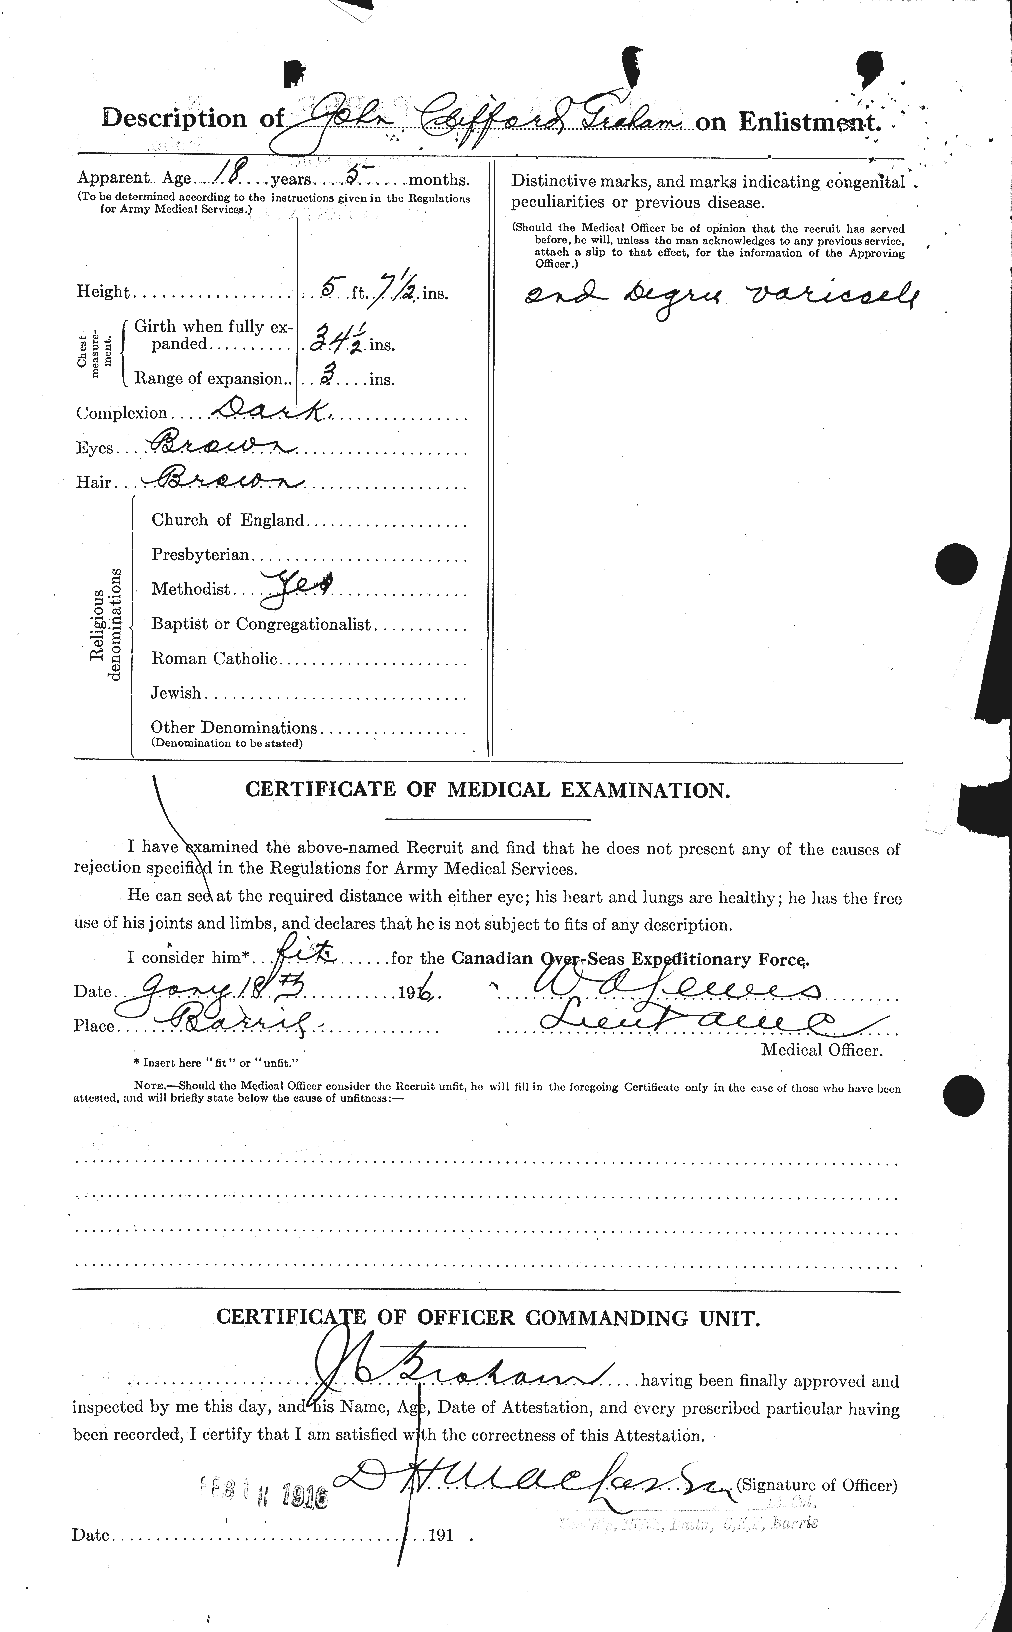 Personnel Records of the First World War - CEF 359164b